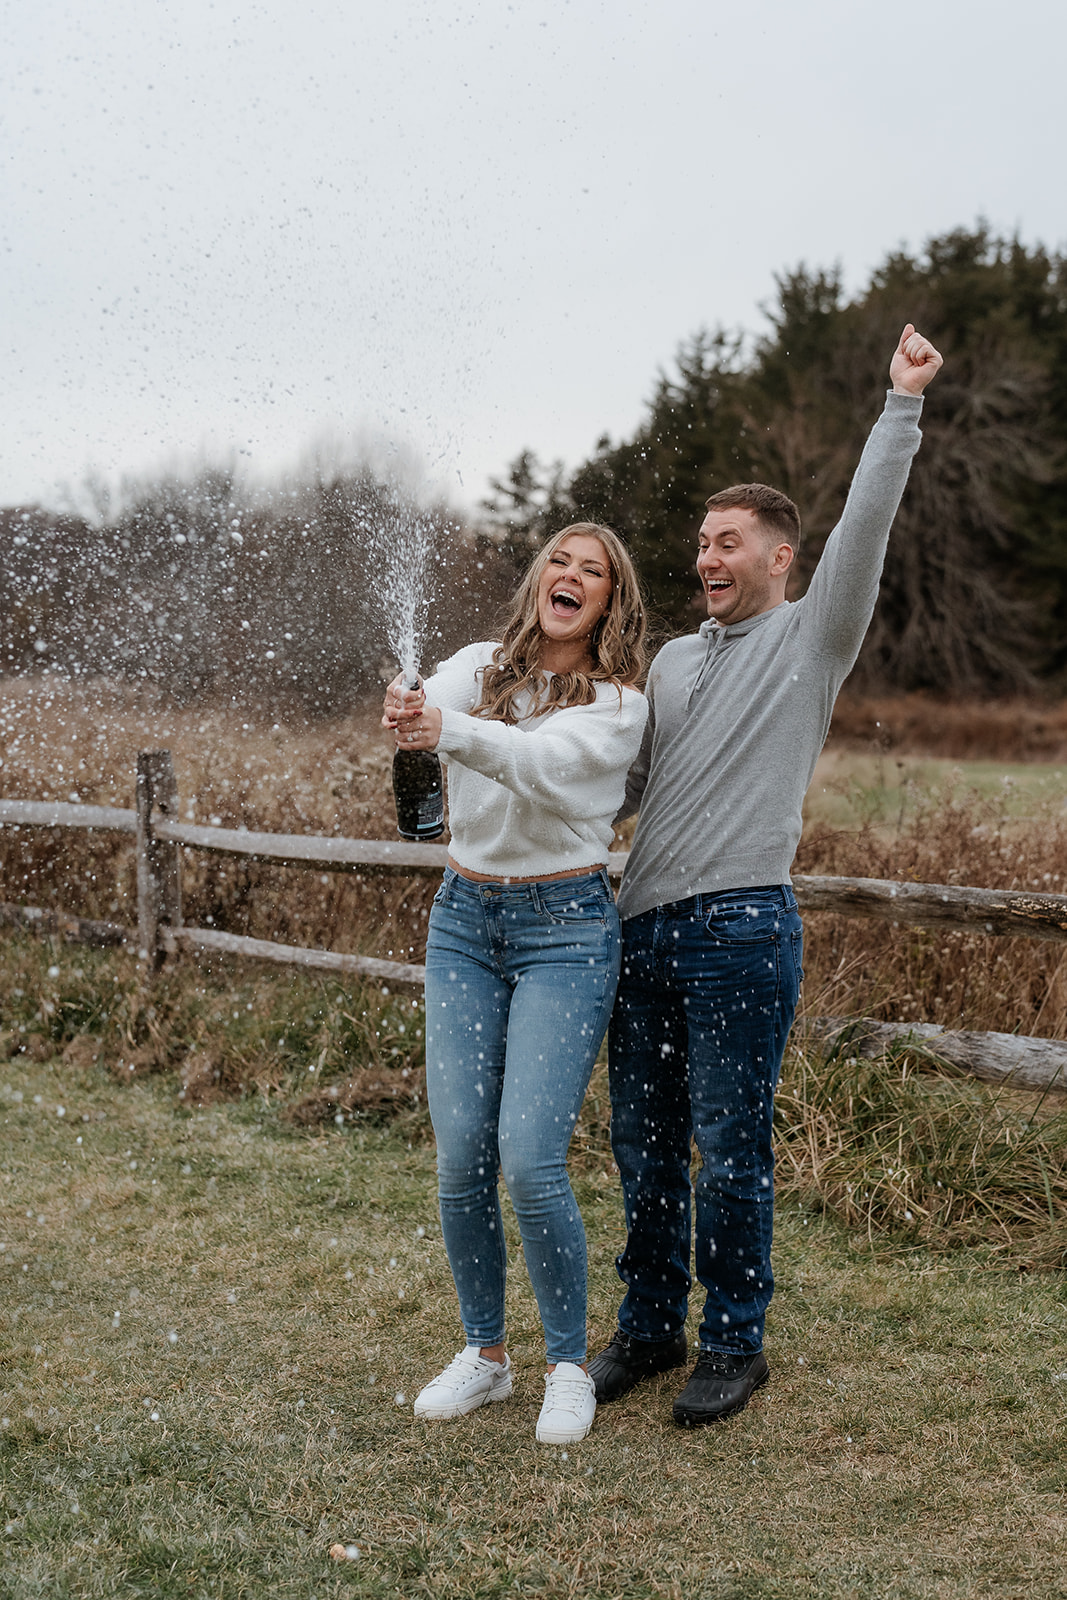 A couple popping champagne in a field during their engagement session.